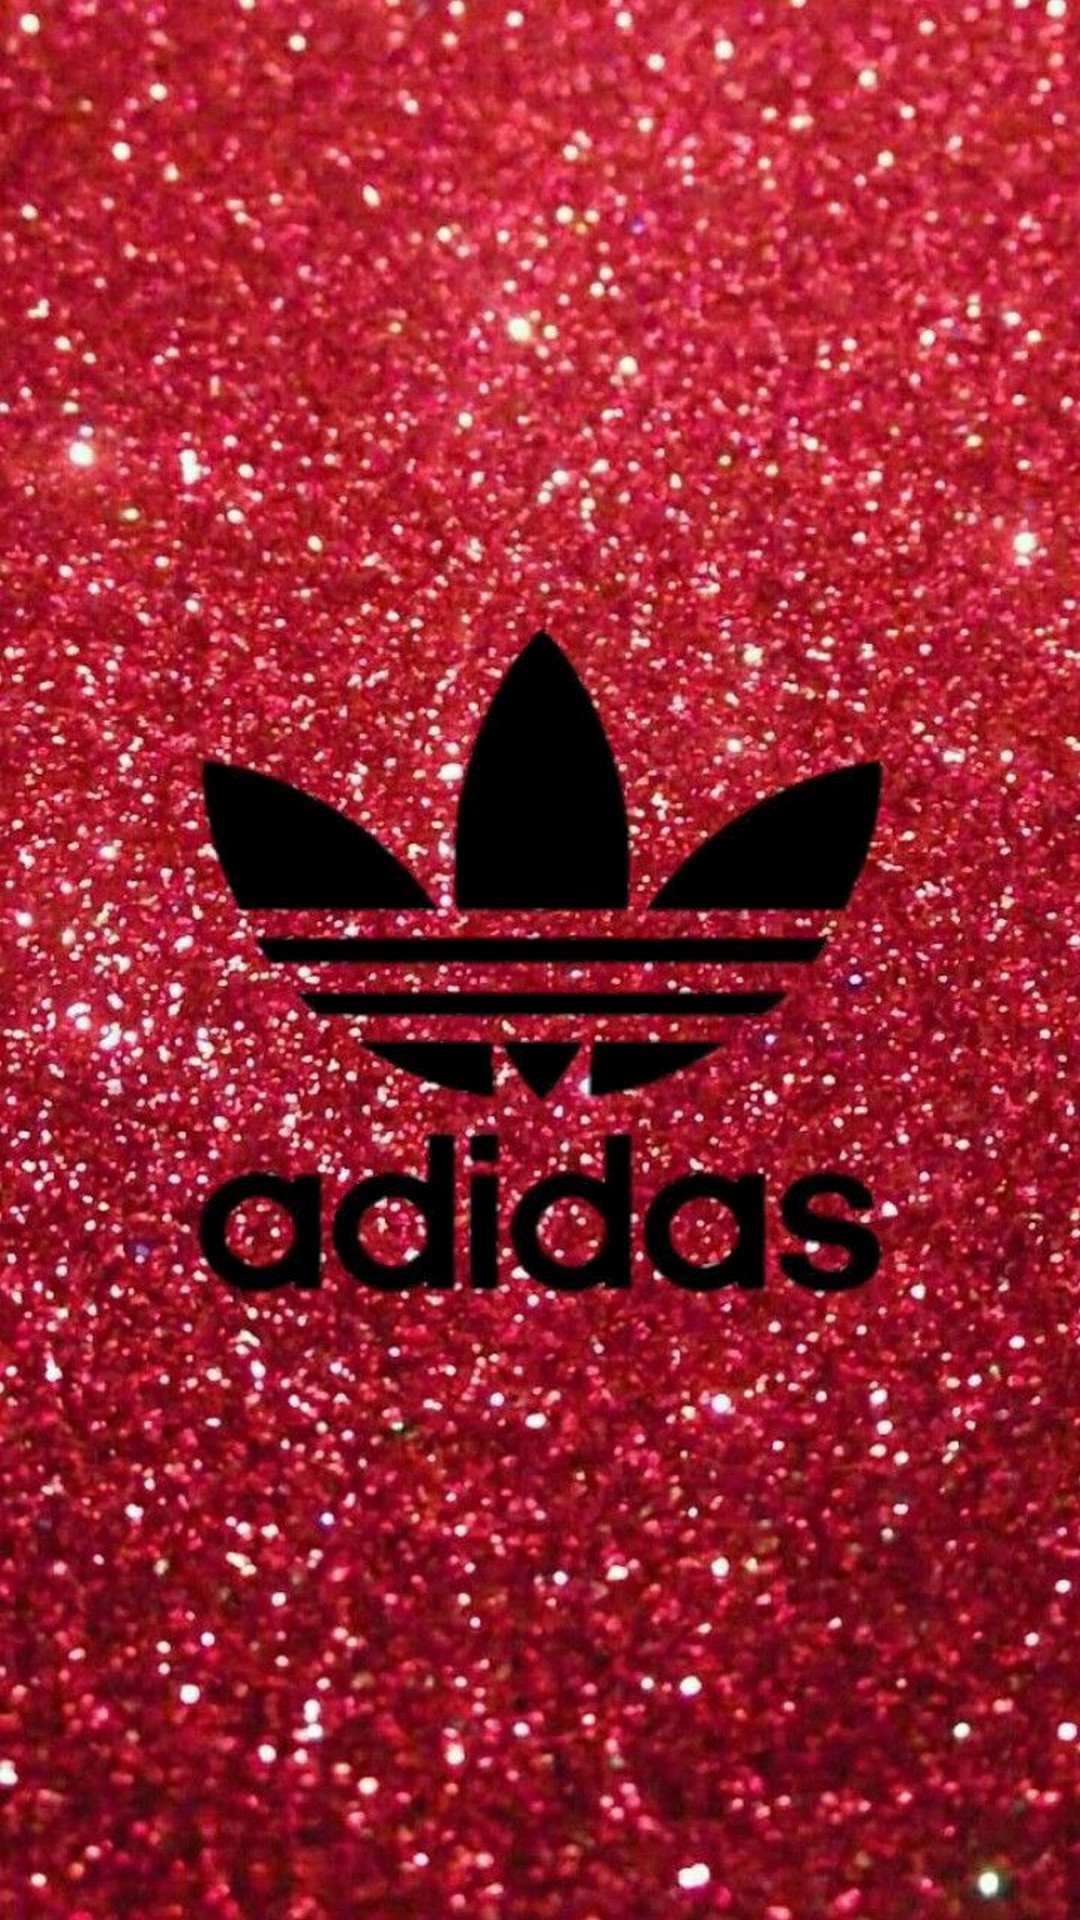 Wallpaper Adidas iPhone with high-resolution 1080x1920 pixel. You can use this wallpaper for your Windows and Mac OS computers as well as your Android and iPhone smartphones